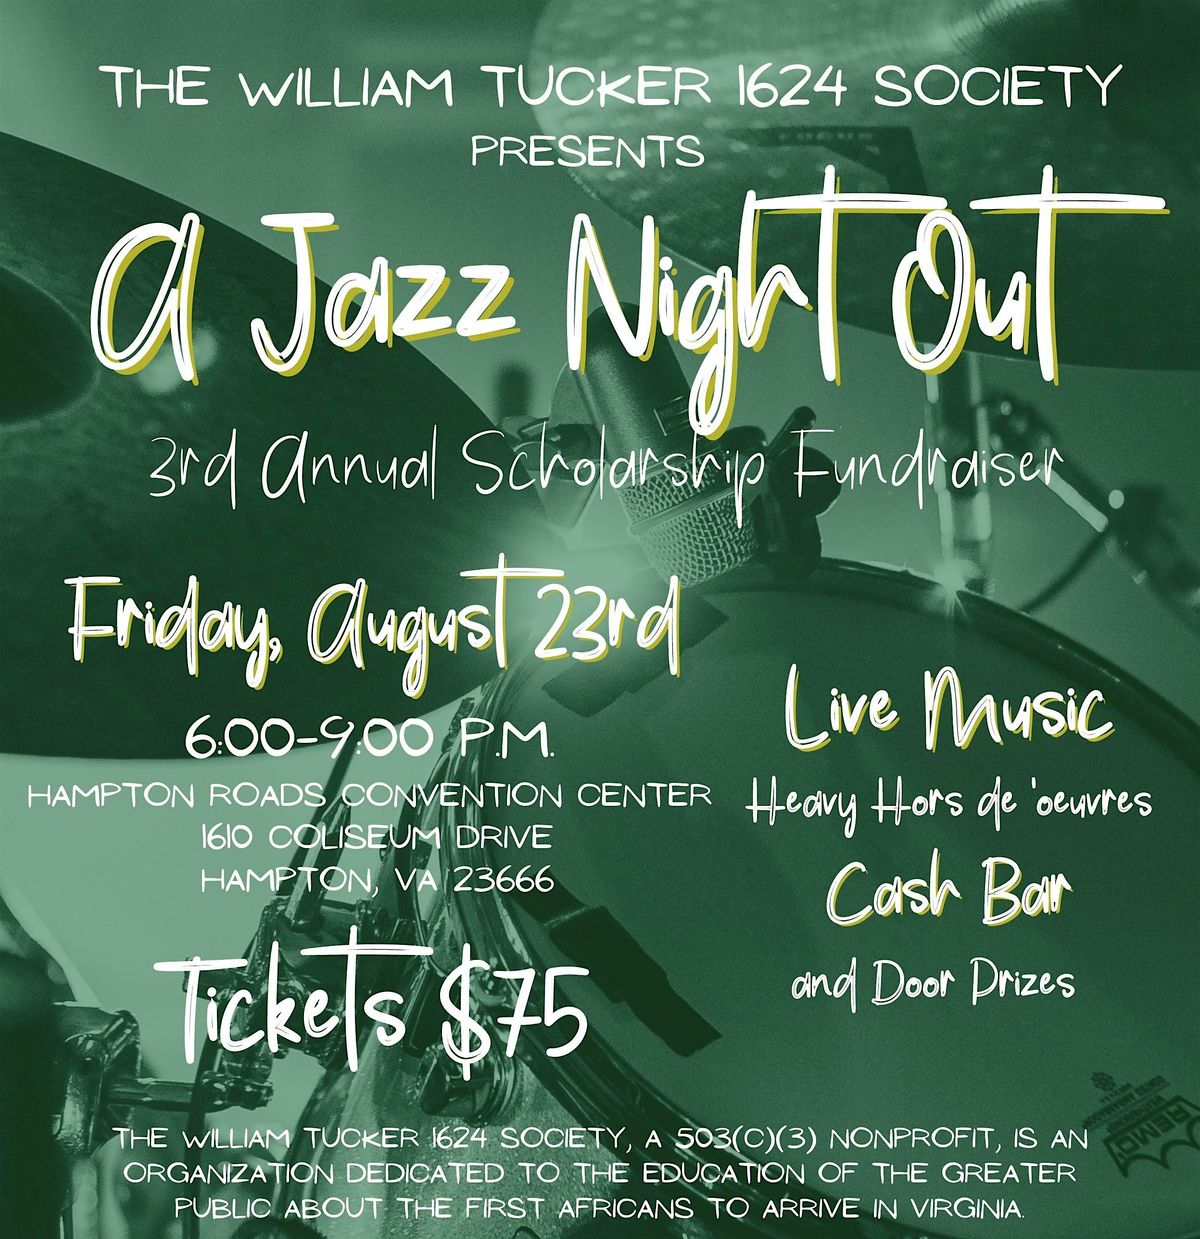 The William Tucker 1624 Society presents  A Jazz Night Out